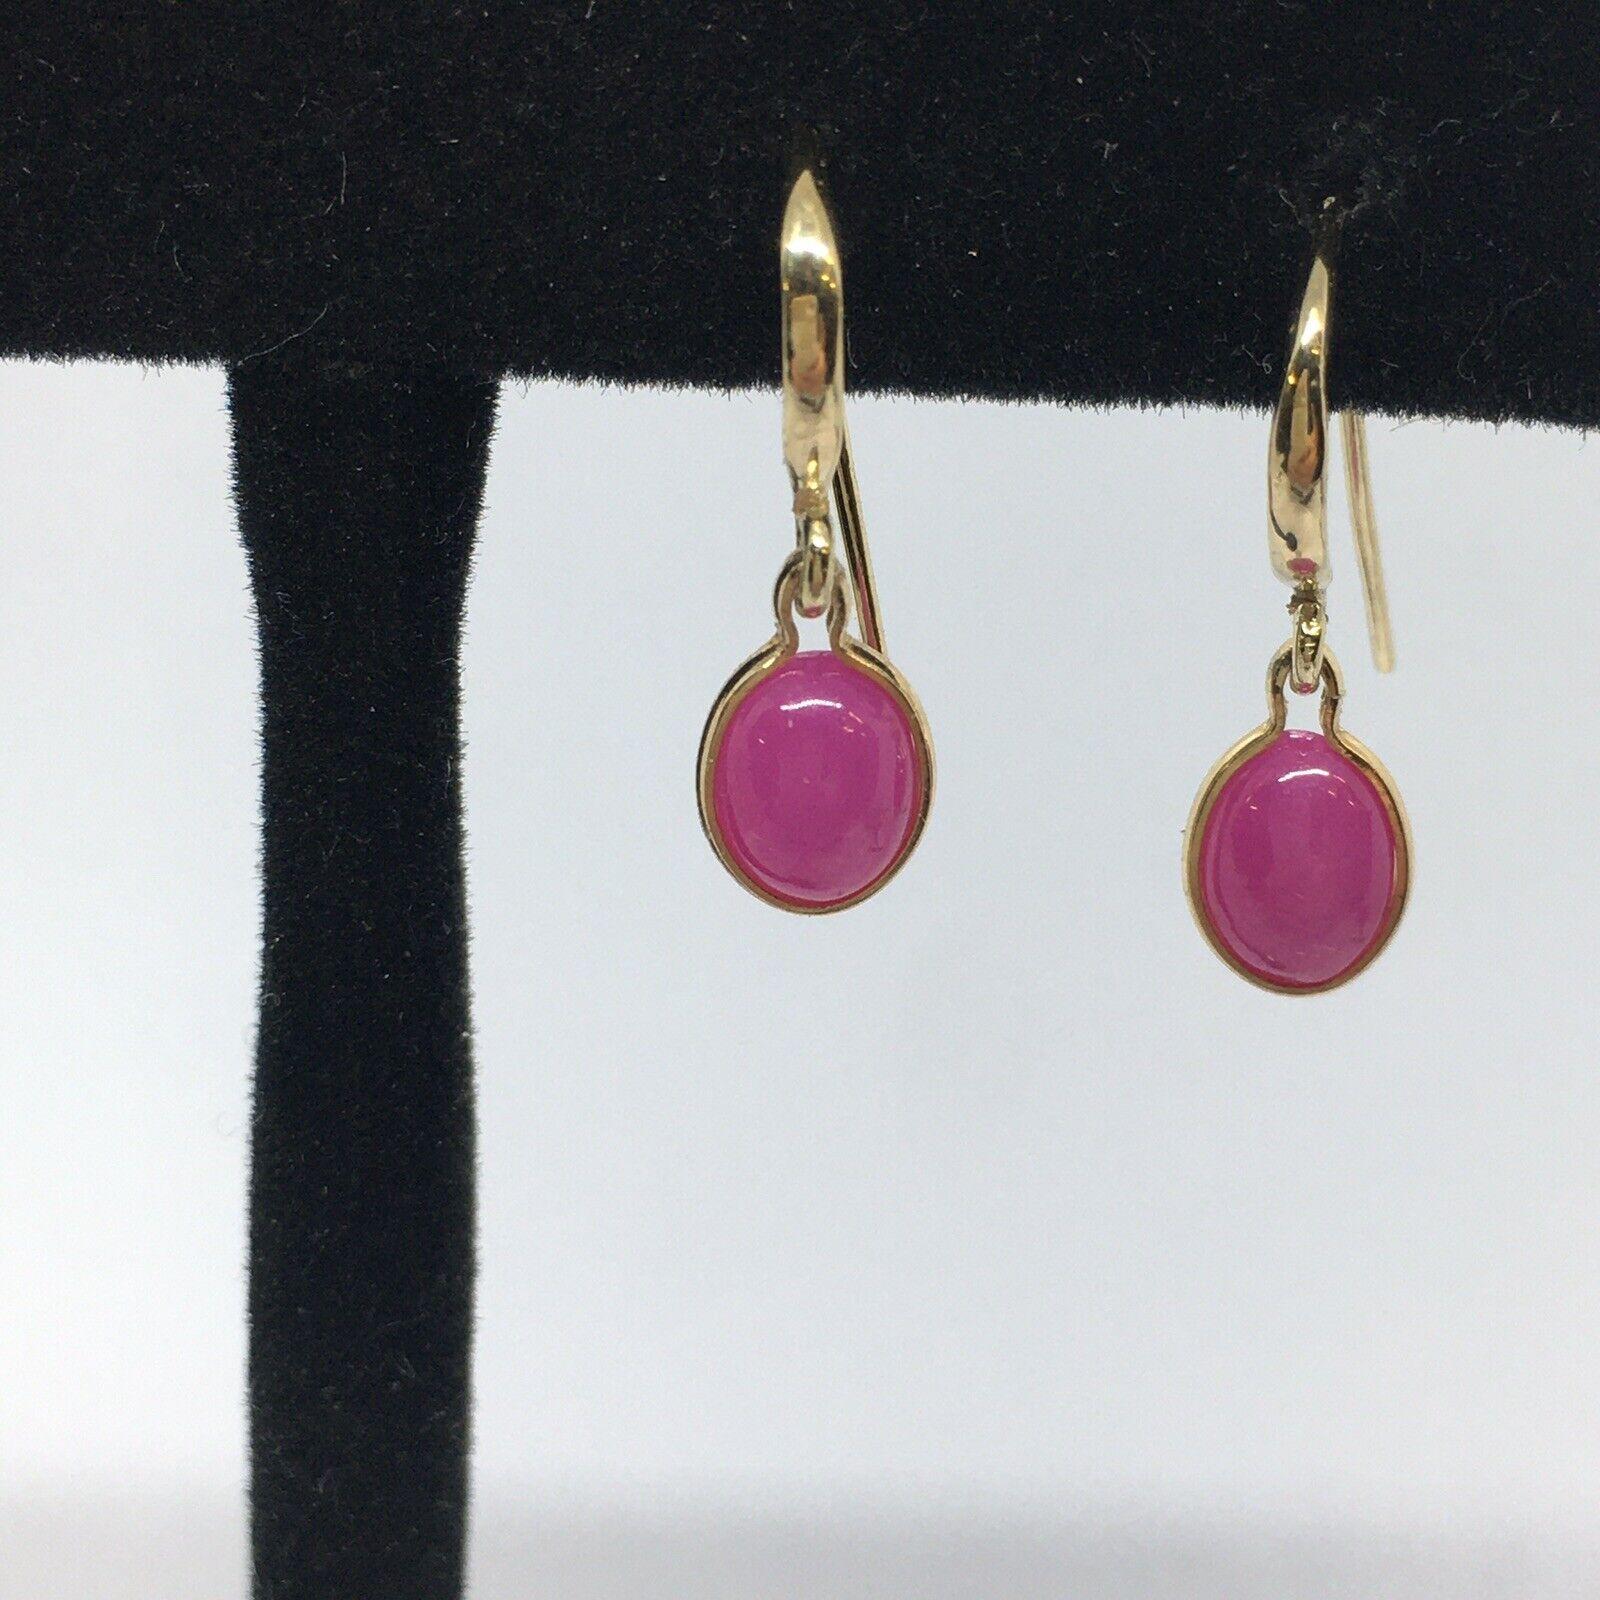 14K Solid Yellow Gold  7mm by 5mm Oval Lindy Star Ruby Dangling Wire Earrings

1.2 gram weight
7mm by 5mm Oval Lindy Star Ruby;   Lindy Star Rubies were manufactured in mass by the Lindy division of Union Carbide from the 1950s to the 1970s.
3/4